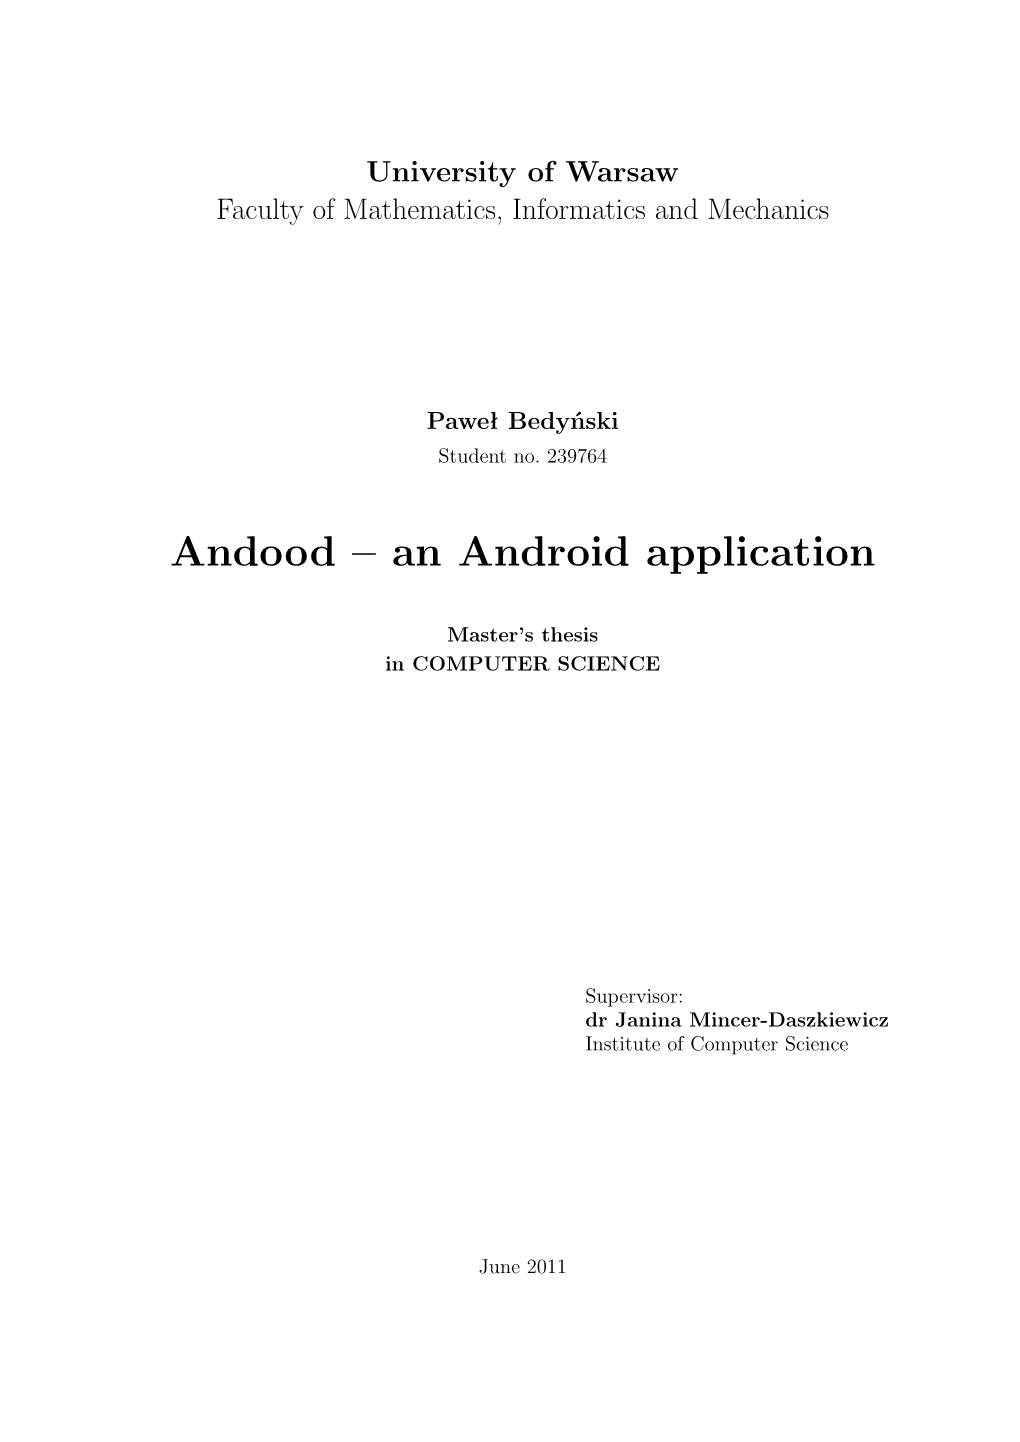 Andood – an Android Application